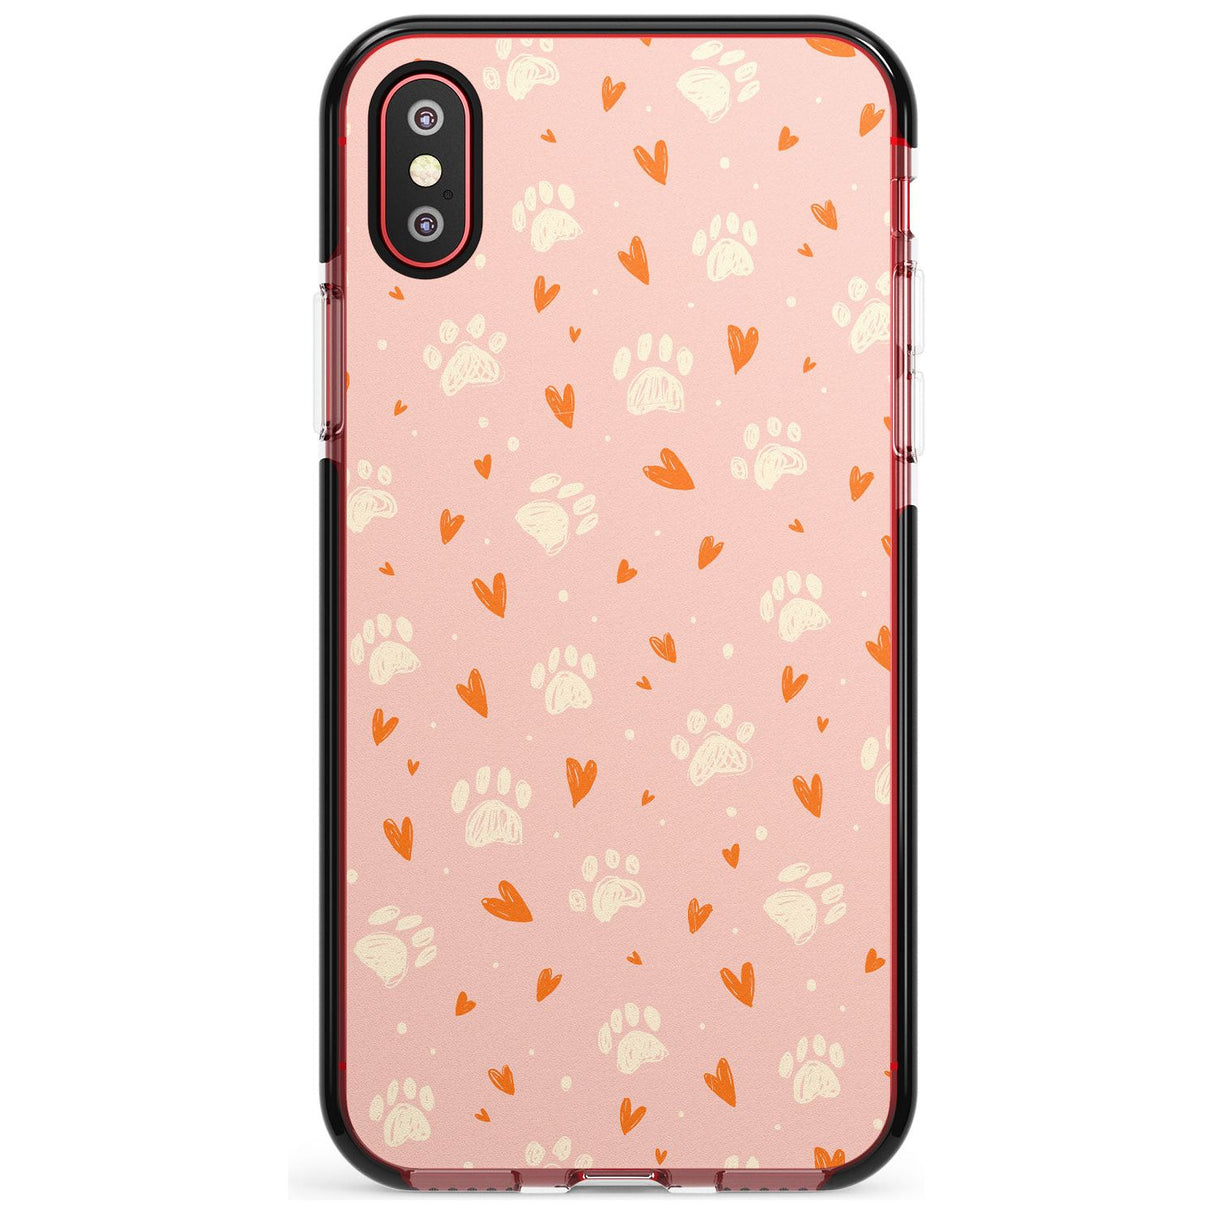 Paws & Hearts Pattern Pink Fade Impact Phone Case for iPhone X XS Max XR